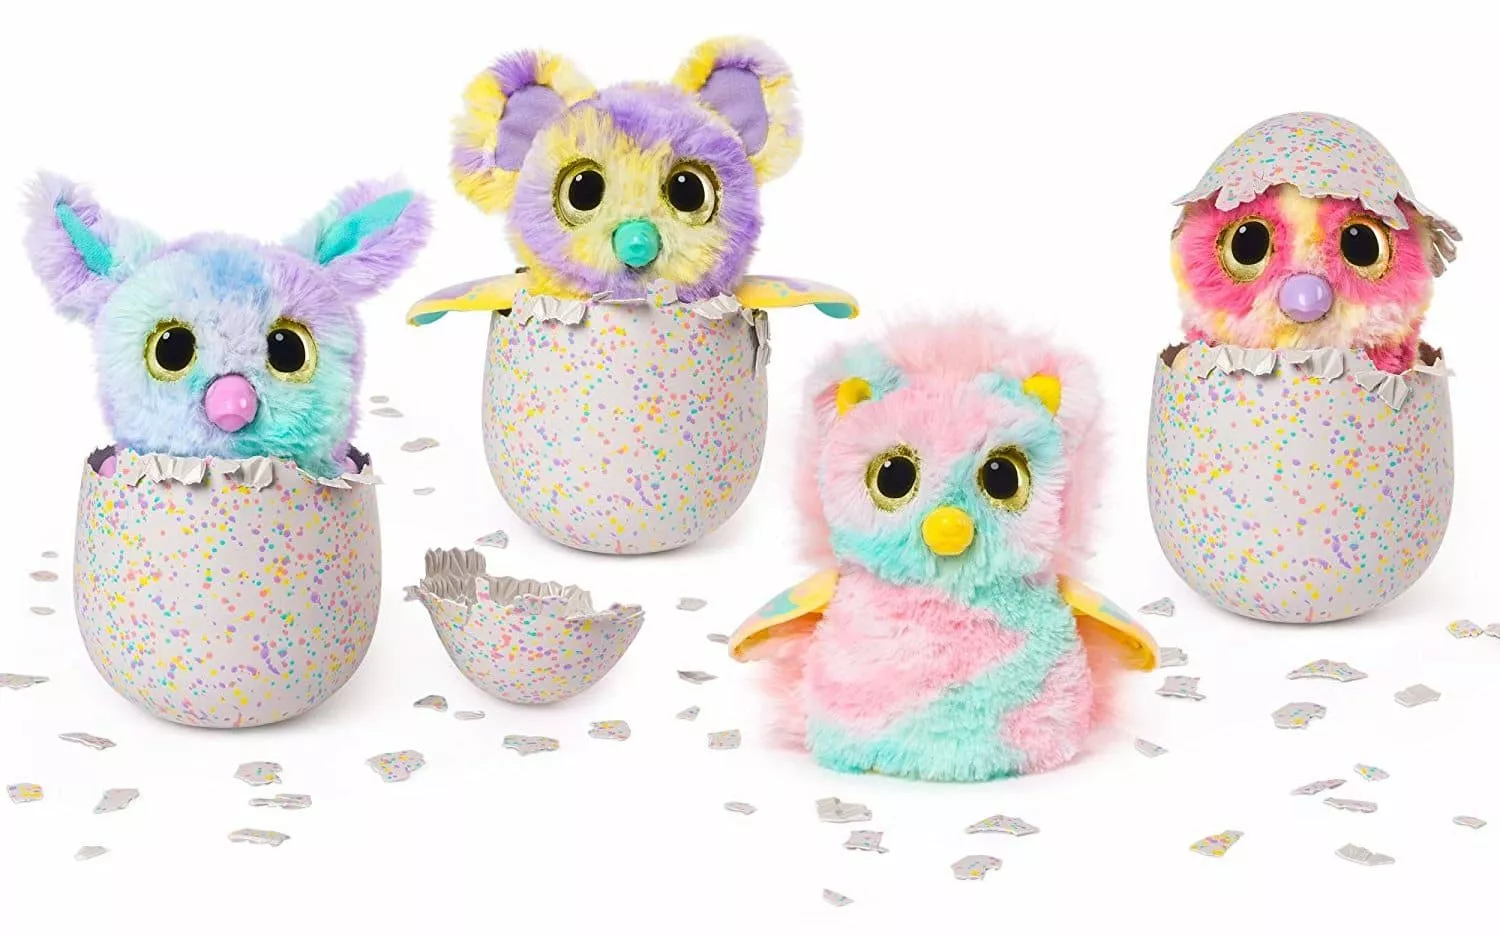 New Hatchimals Mystery 2018 - Where to Buy Fluffy Cloud Cove Hatchimal